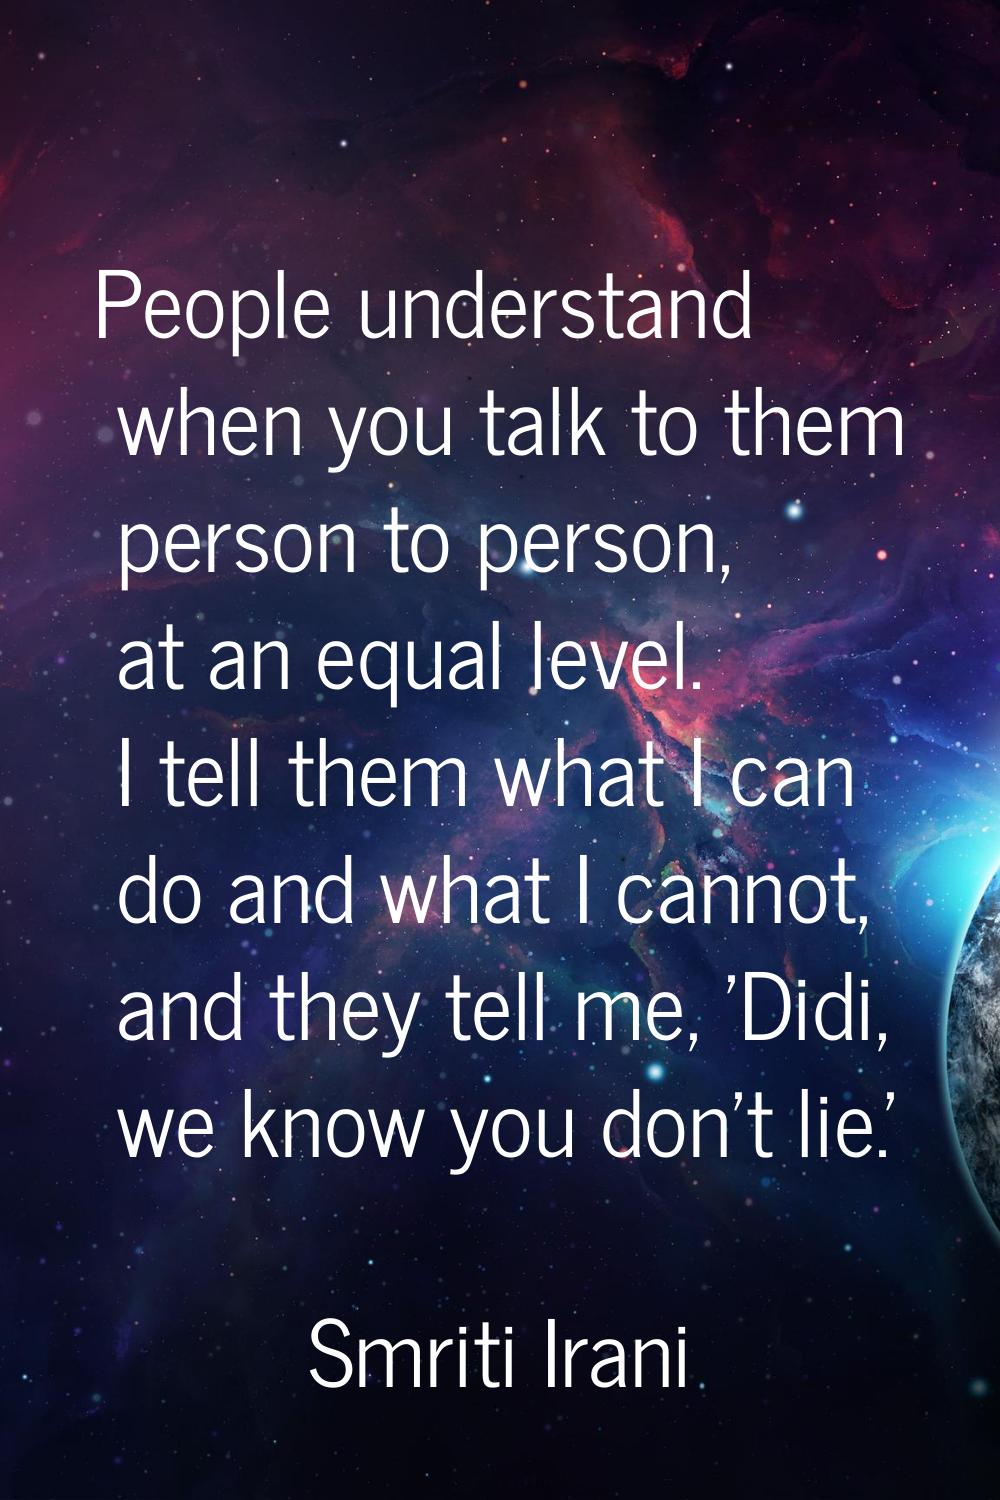 People understand when you talk to them person to person, at an equal level. I tell them what I can